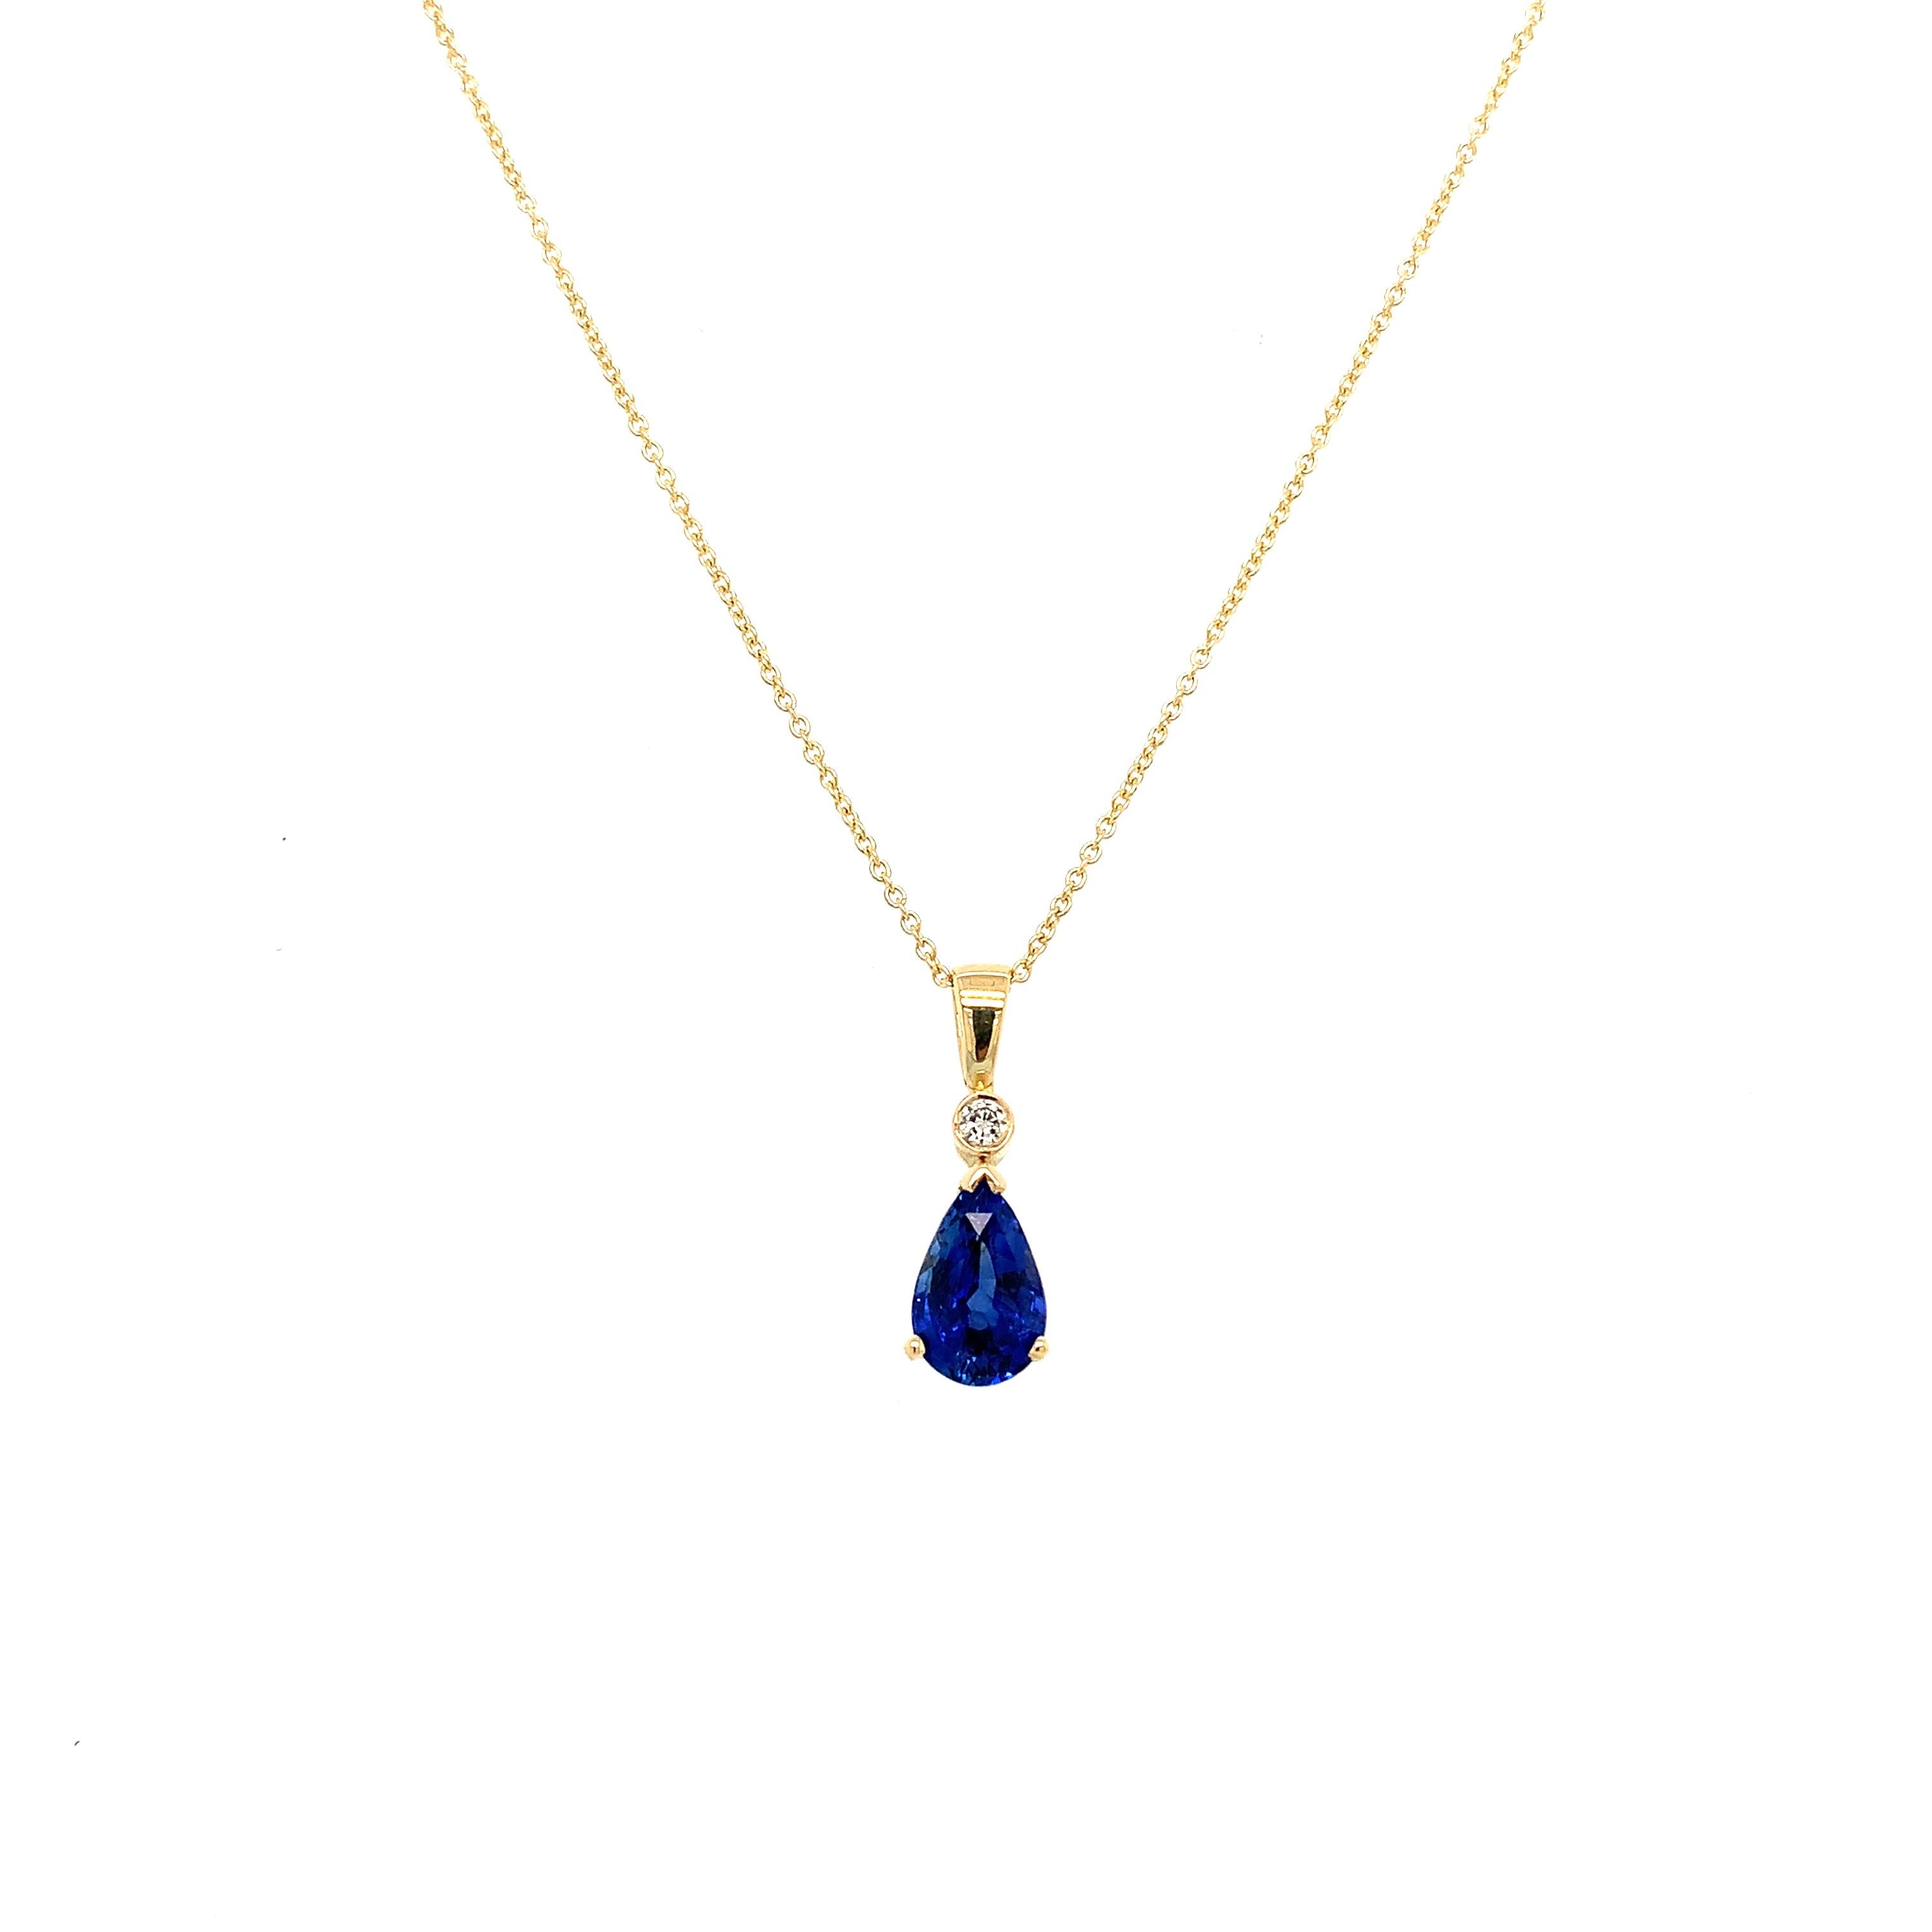 Ceylon sapphire and diamond drop pendant necklace 18k yellow gold
Blue Ceylon sapphire pear shaped natural gemstone weight approximately 1.10ct 
Round brilliant diamond F colour VS1 clarity total weight 0.10ct
Chain length 18 inches hallmarked
Box